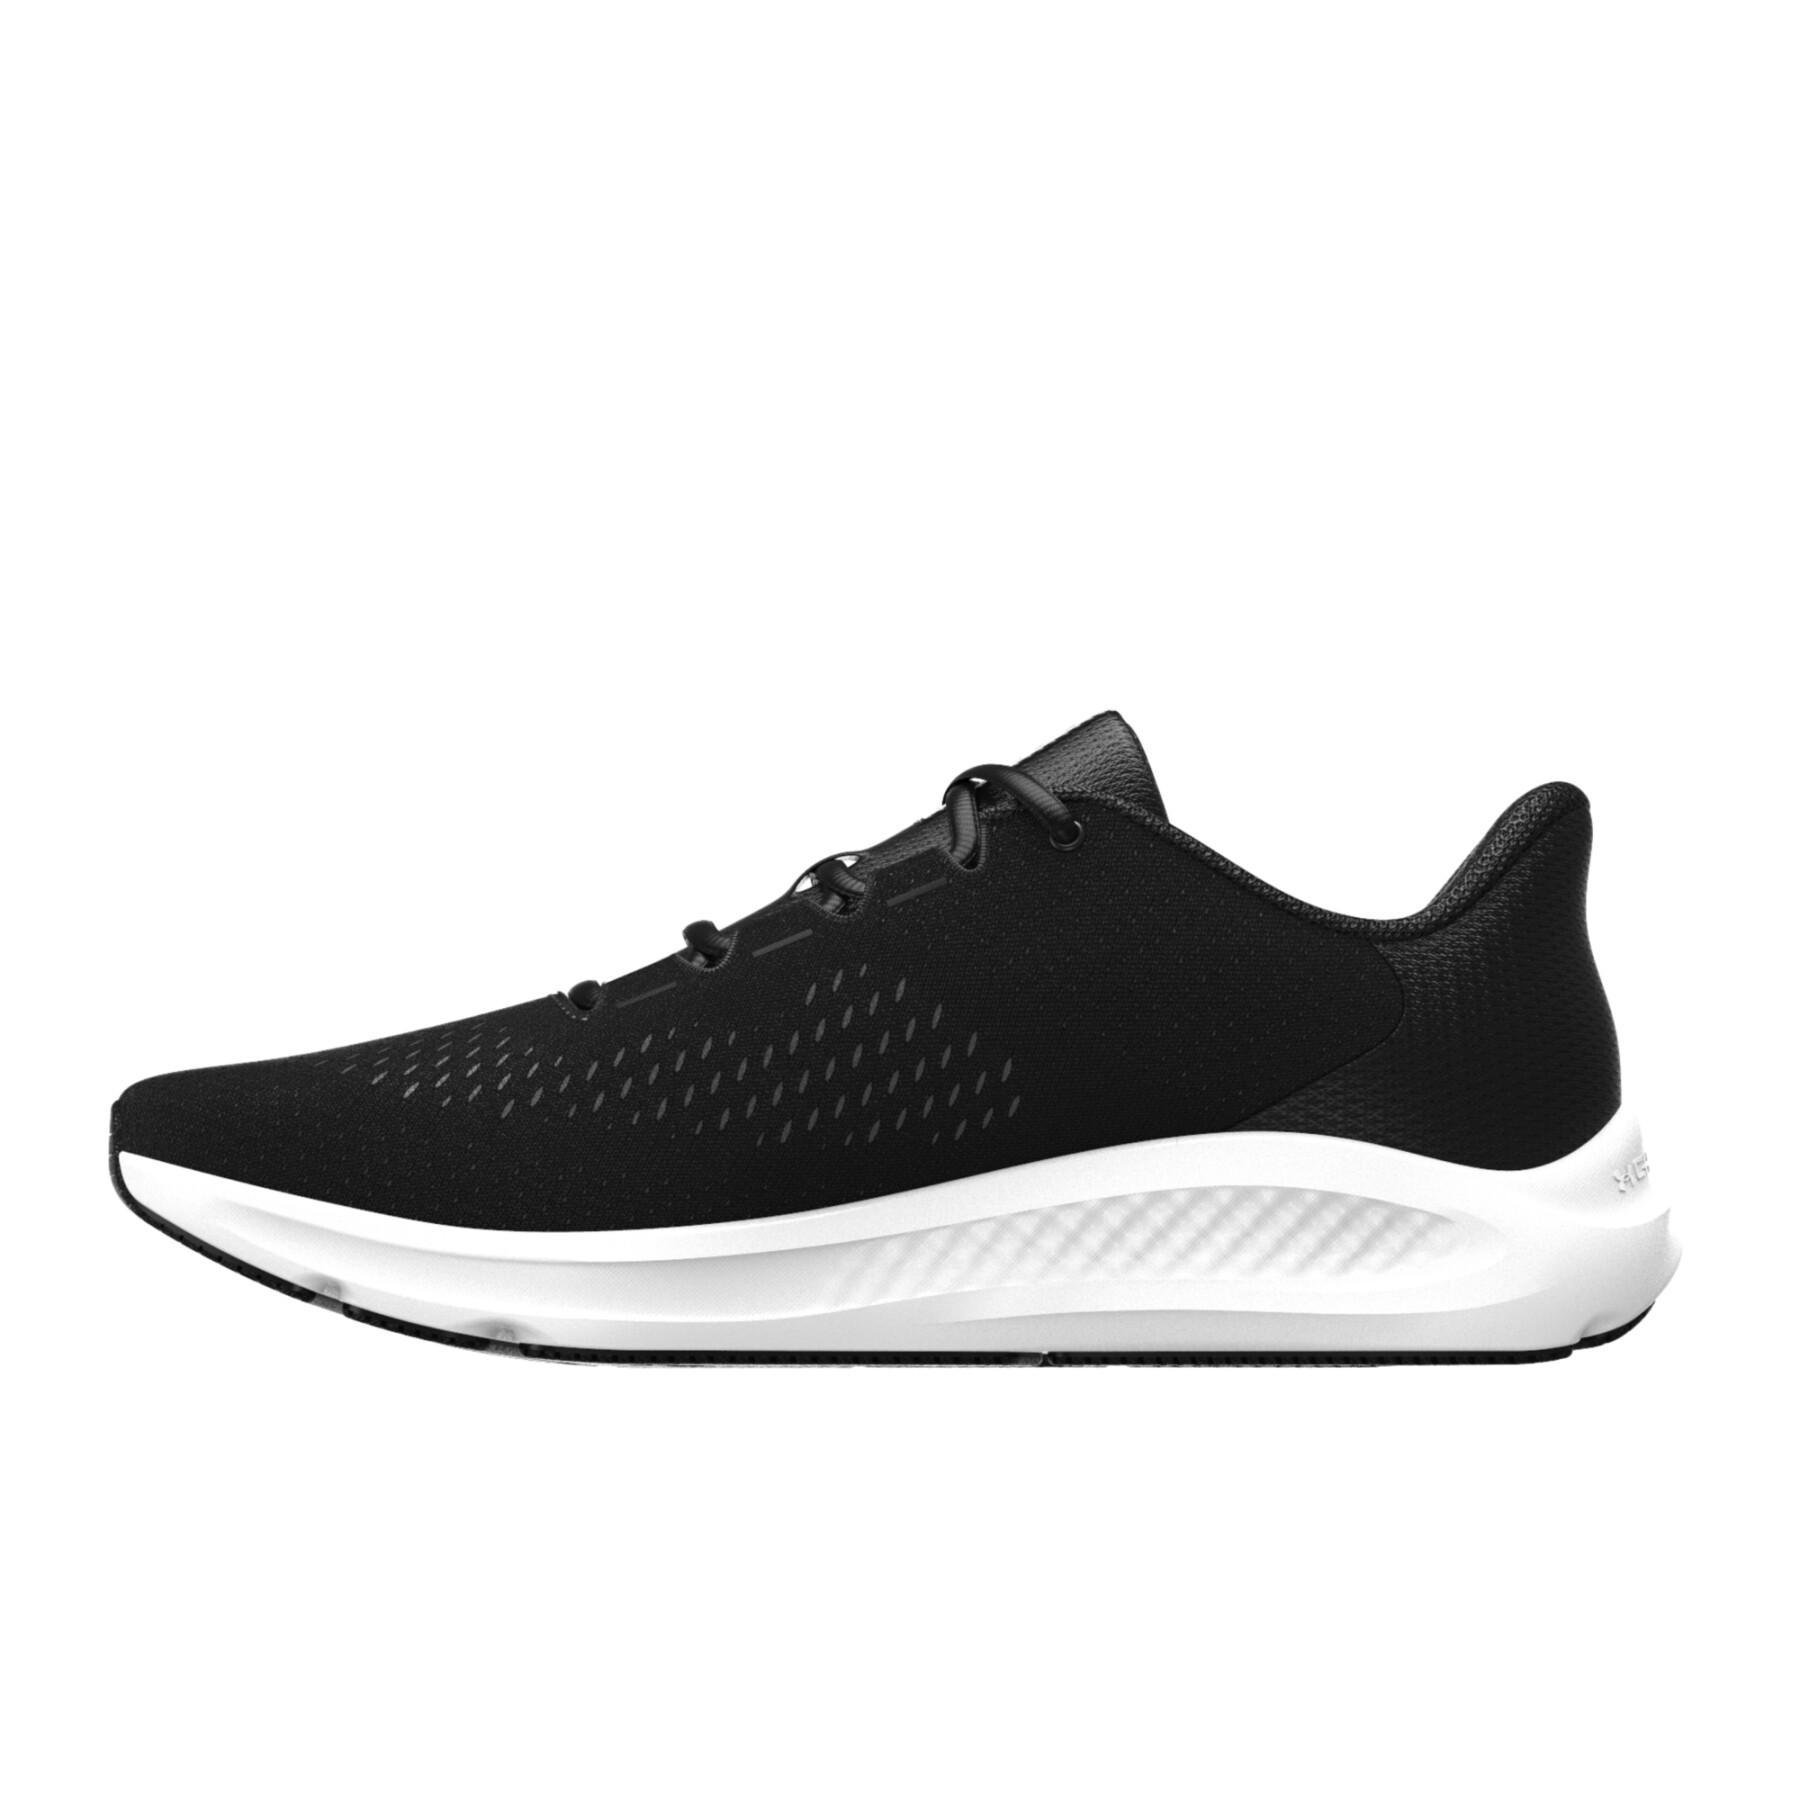 Zapatillas de running para mujer Under Armour Charged Pursuit 3